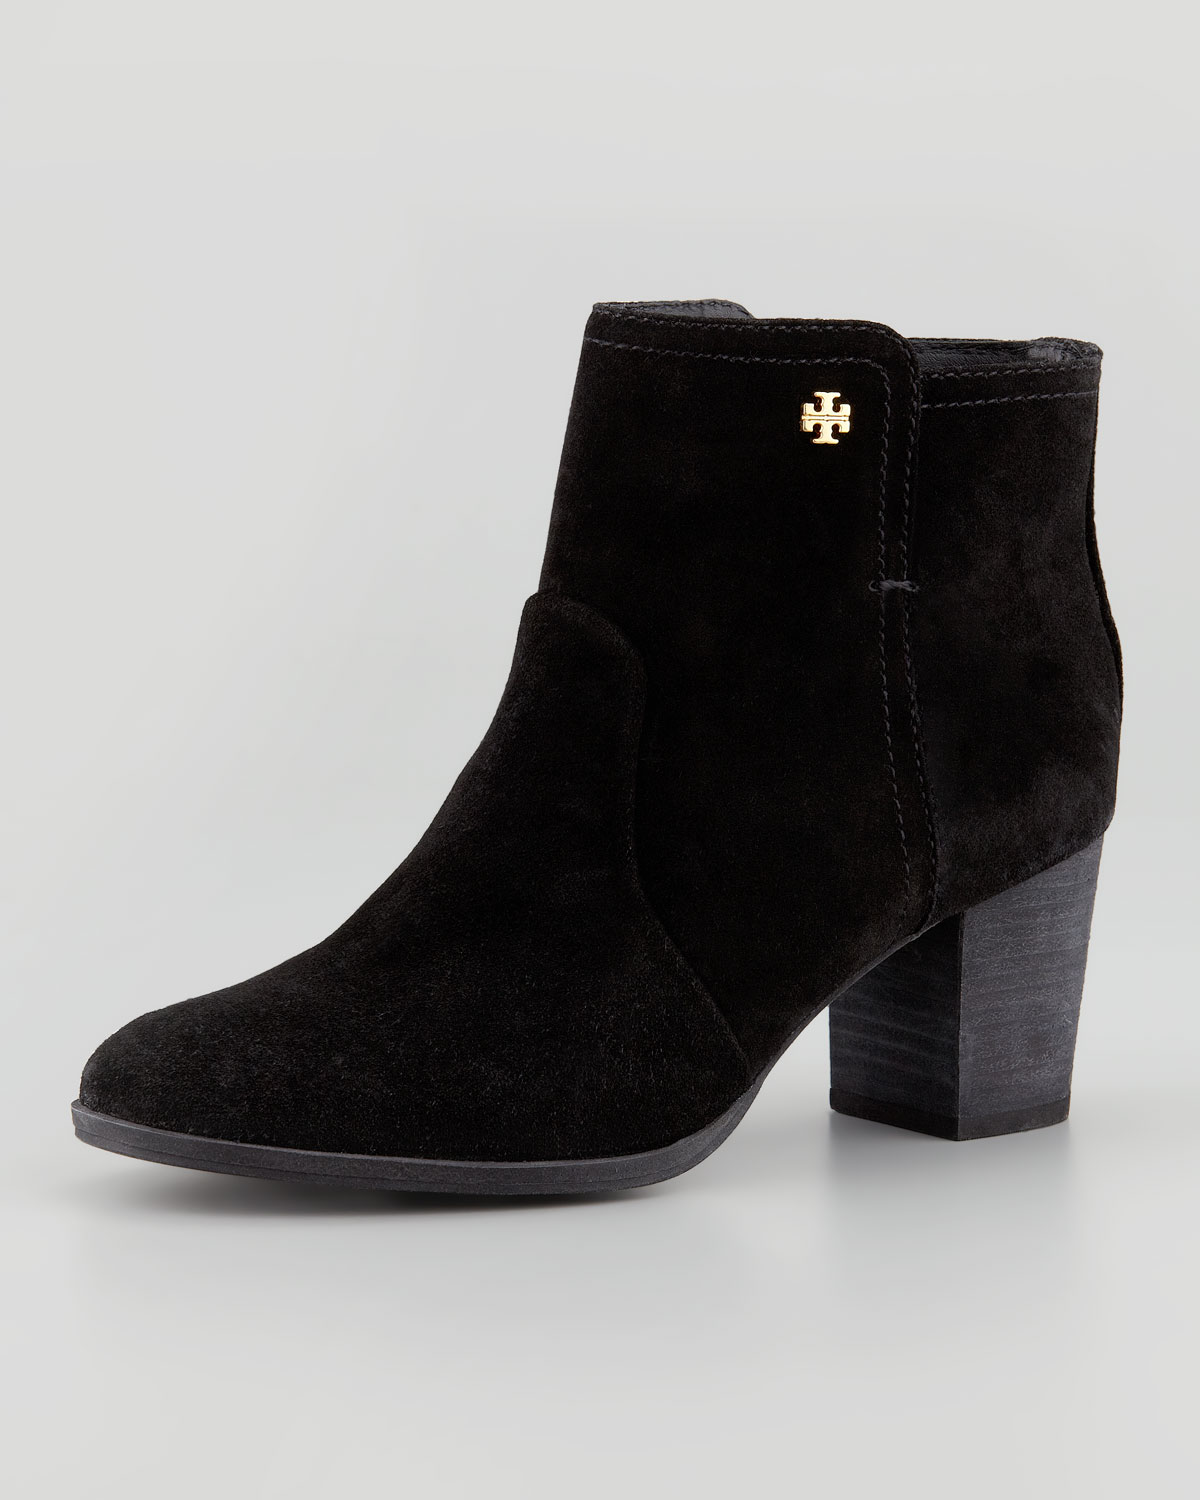 Tory Burch Sabe Suede Bootie in Black 